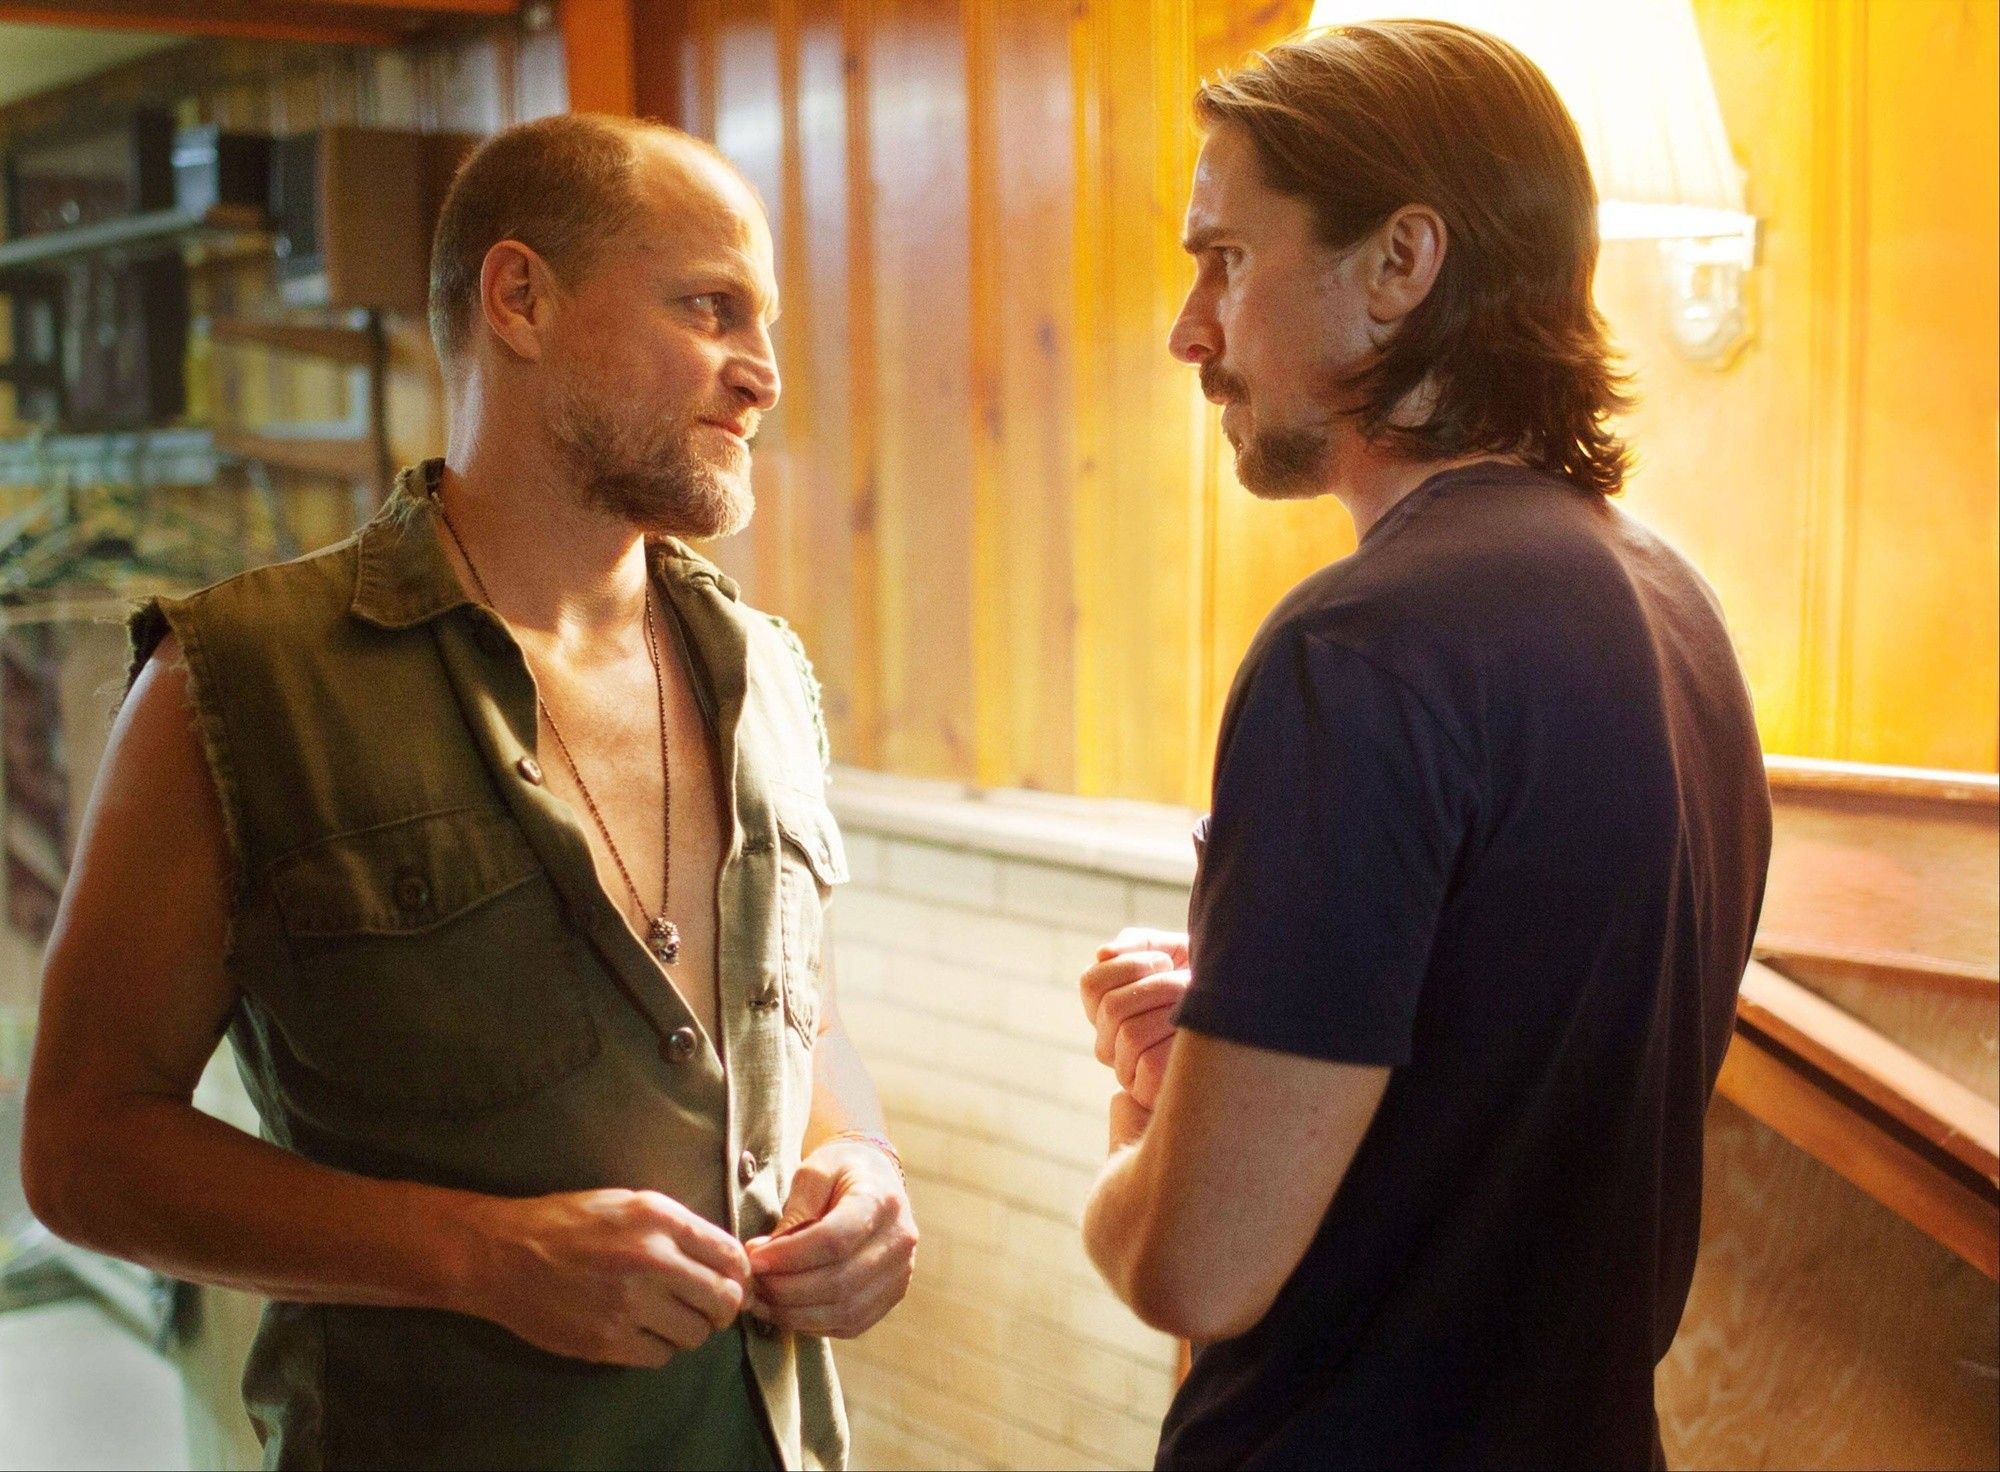 Woody Harrelson stars as Curtis DeGroat and Christian Bale stars as Russell Baze in Relativity Media's Out of the Furnace (2013). Photo credit by Kerry Hayes.